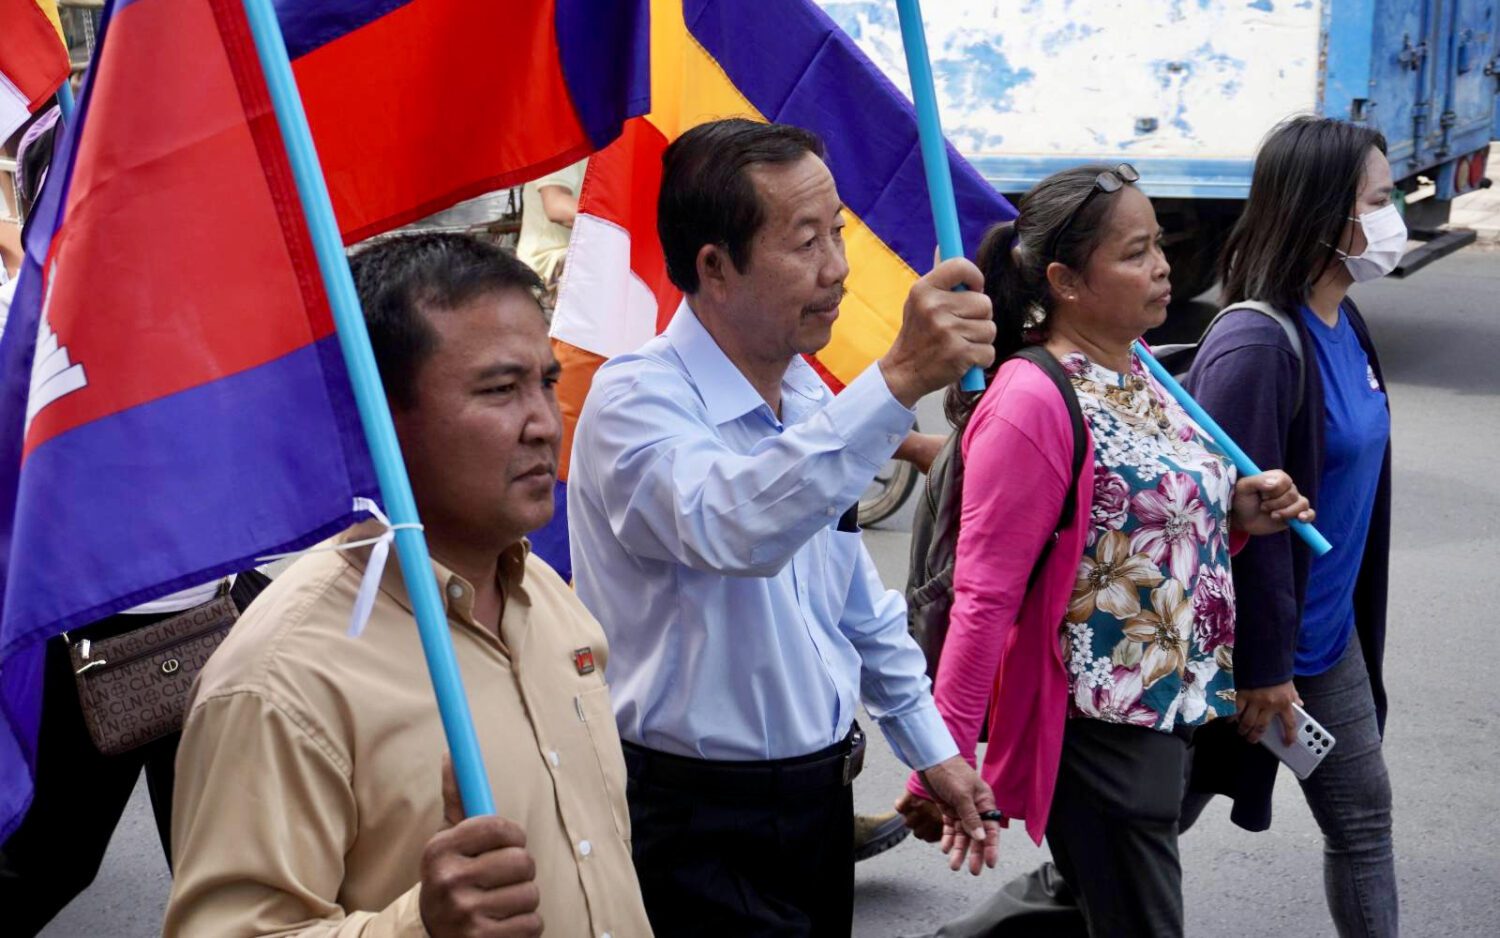 New Candlelight member Rong Chhun, blue shirt, marches with other teachers's association members in Phnom Penh on February 1, 2023. (Hean Rangsey/VOD)